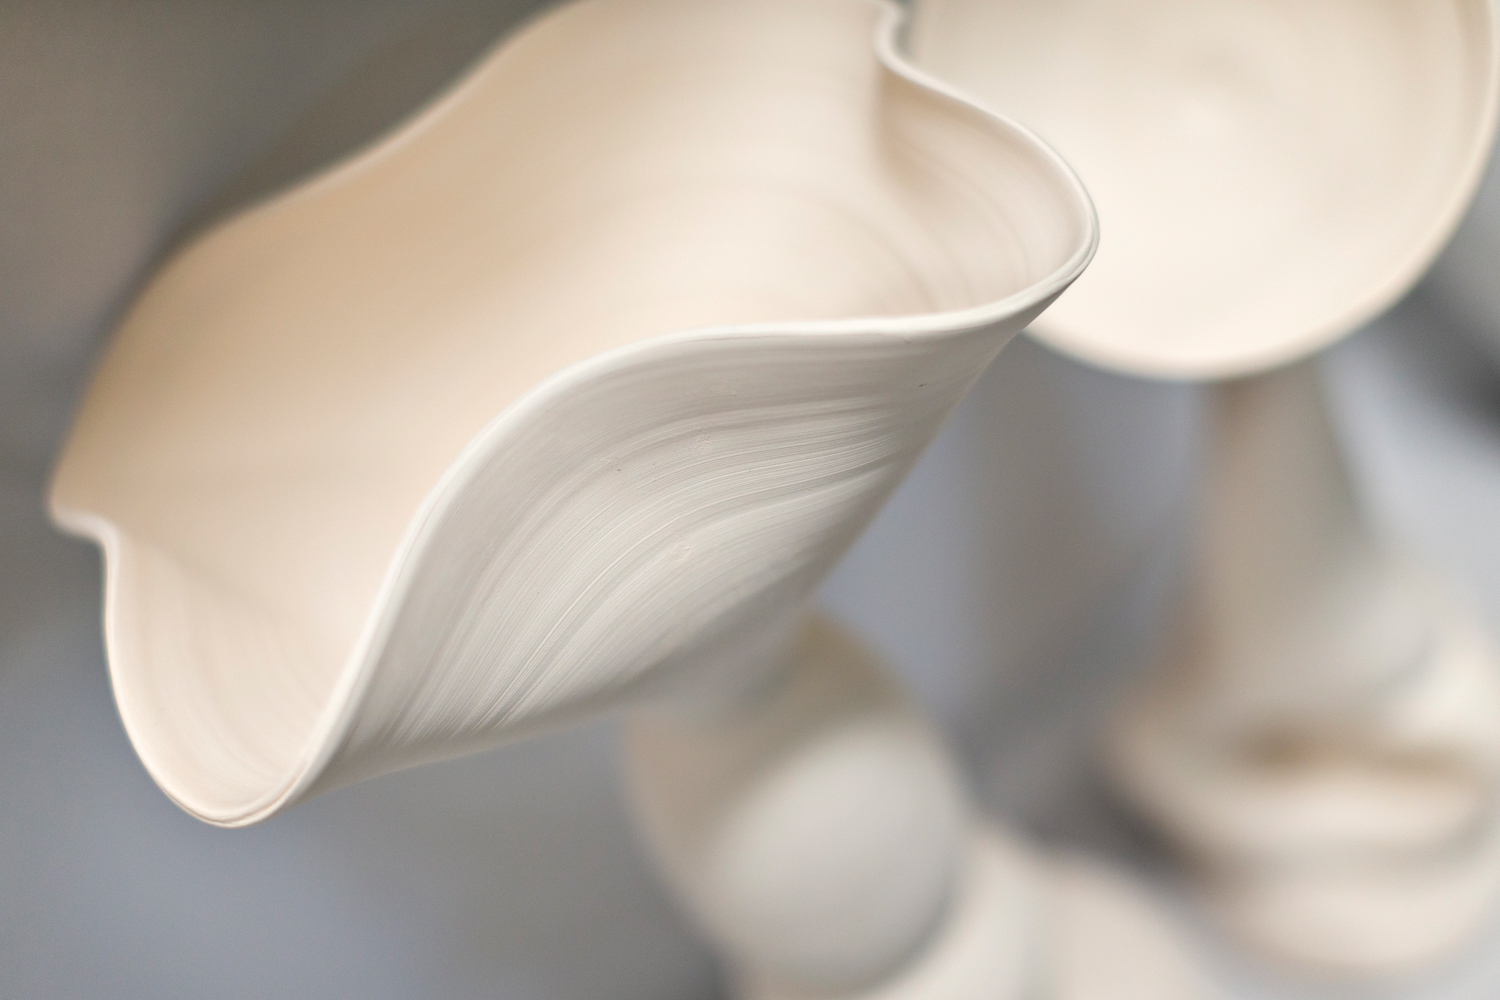 a close-up of one of palombo's minimalist white sculptures